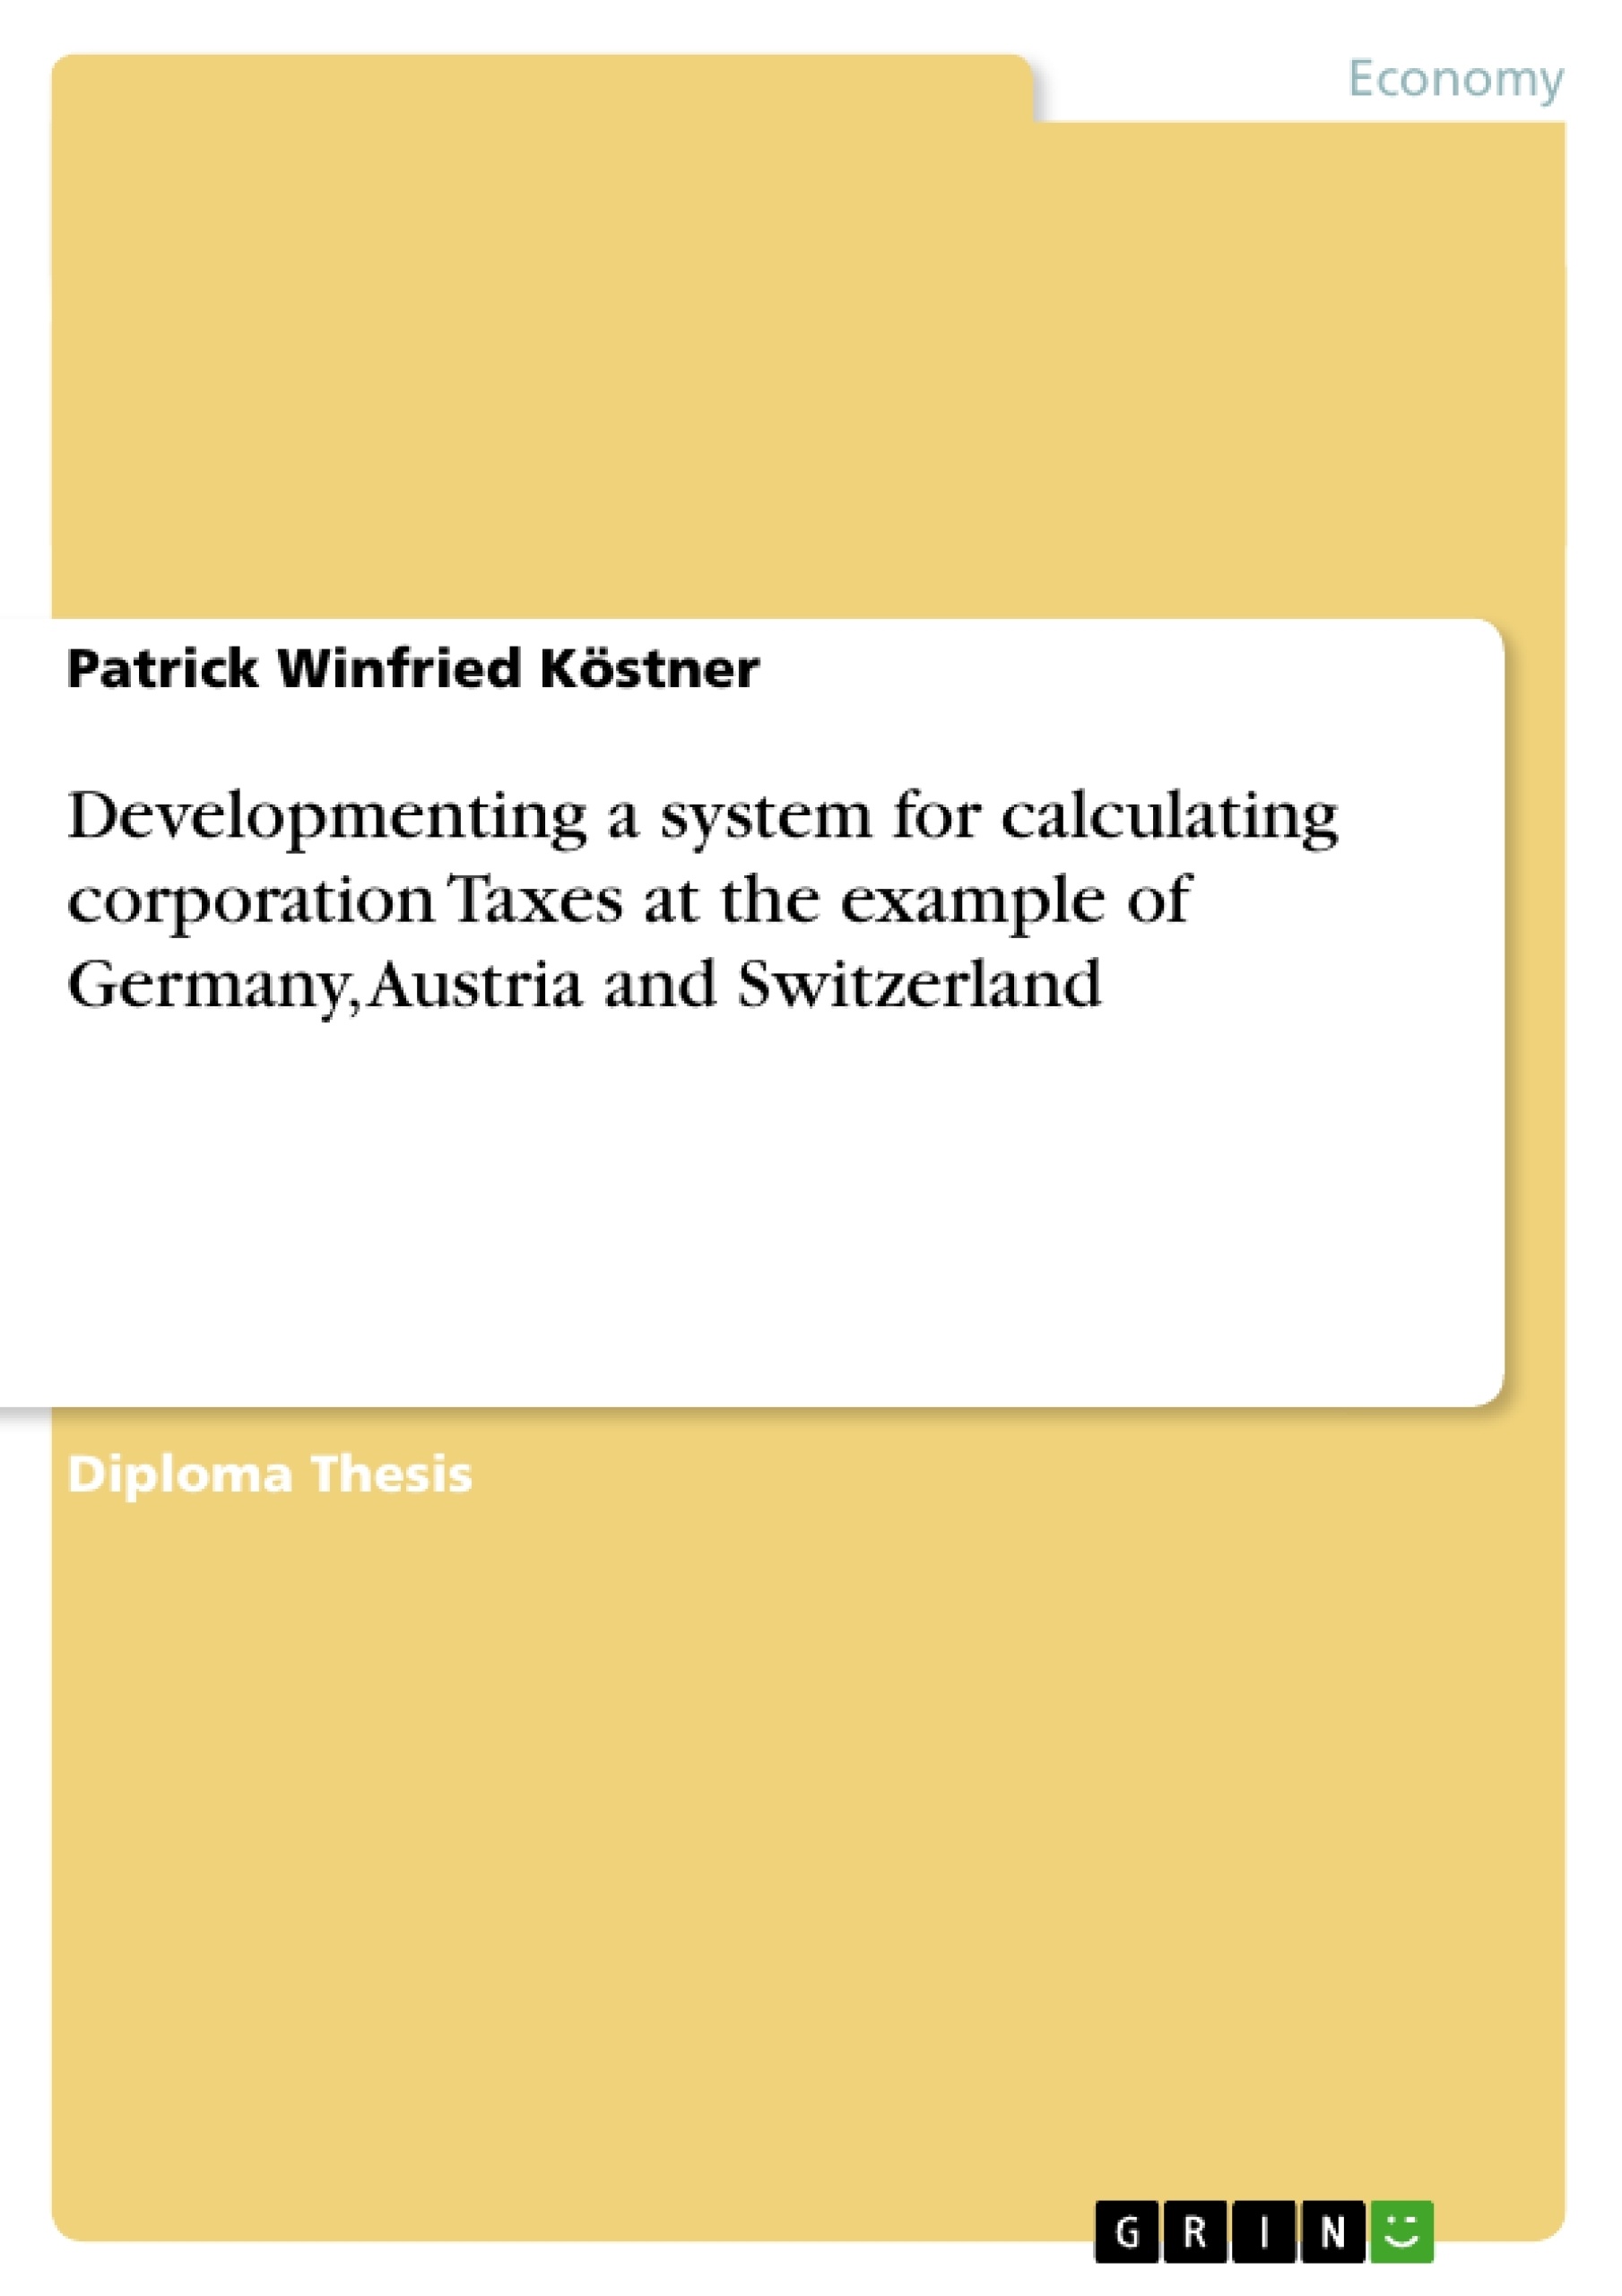 Title: Developmenting a system for calculating corporation Taxes at the example of Germany, Austria and Switzerland